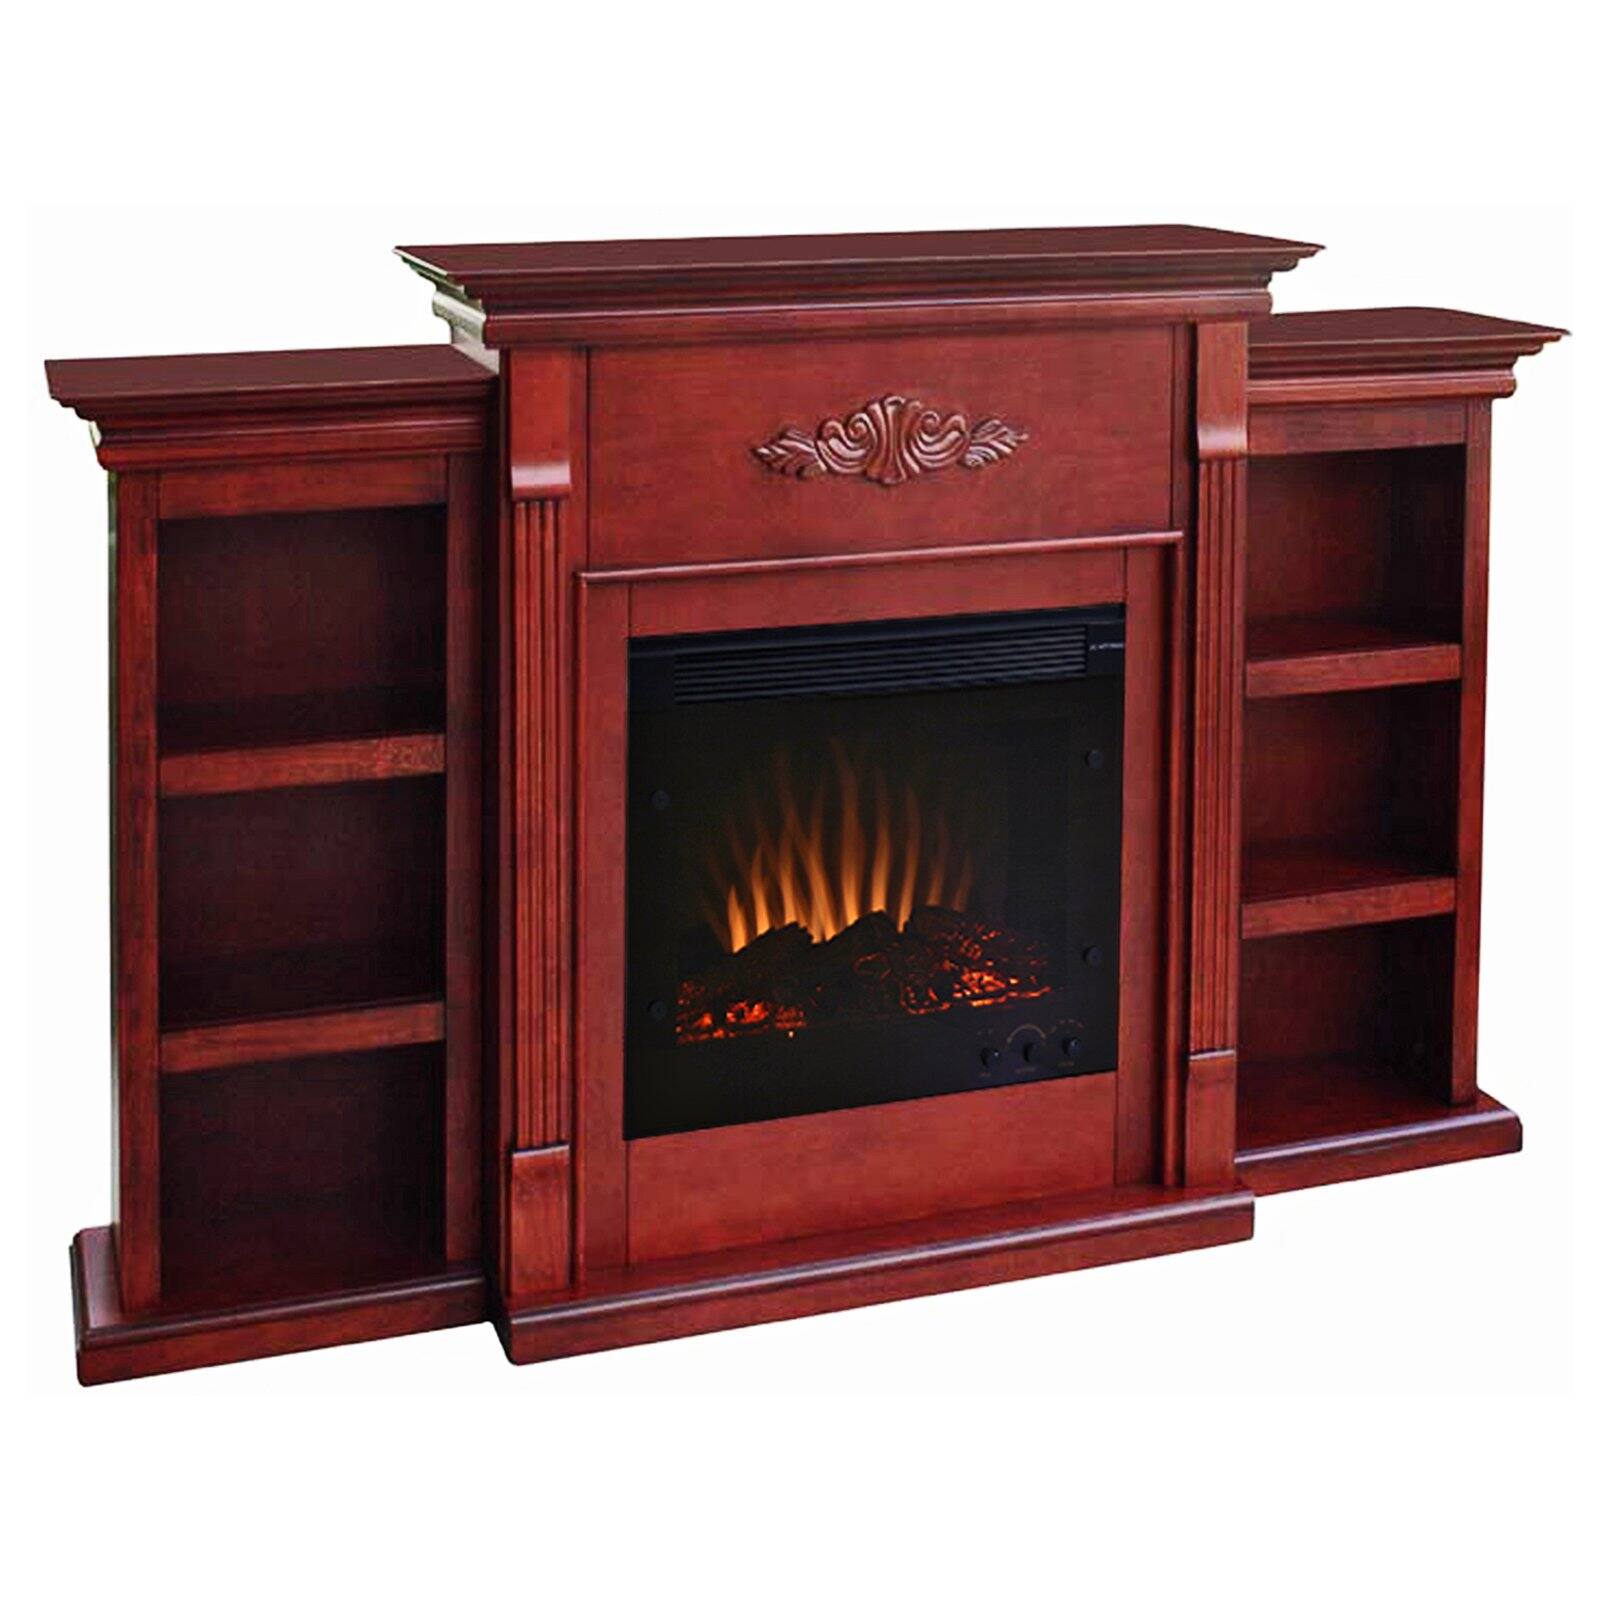 SEI Furniture Fredricksburg Wood Electric Fireplace with Bookcases in Brown - image 1 of 2